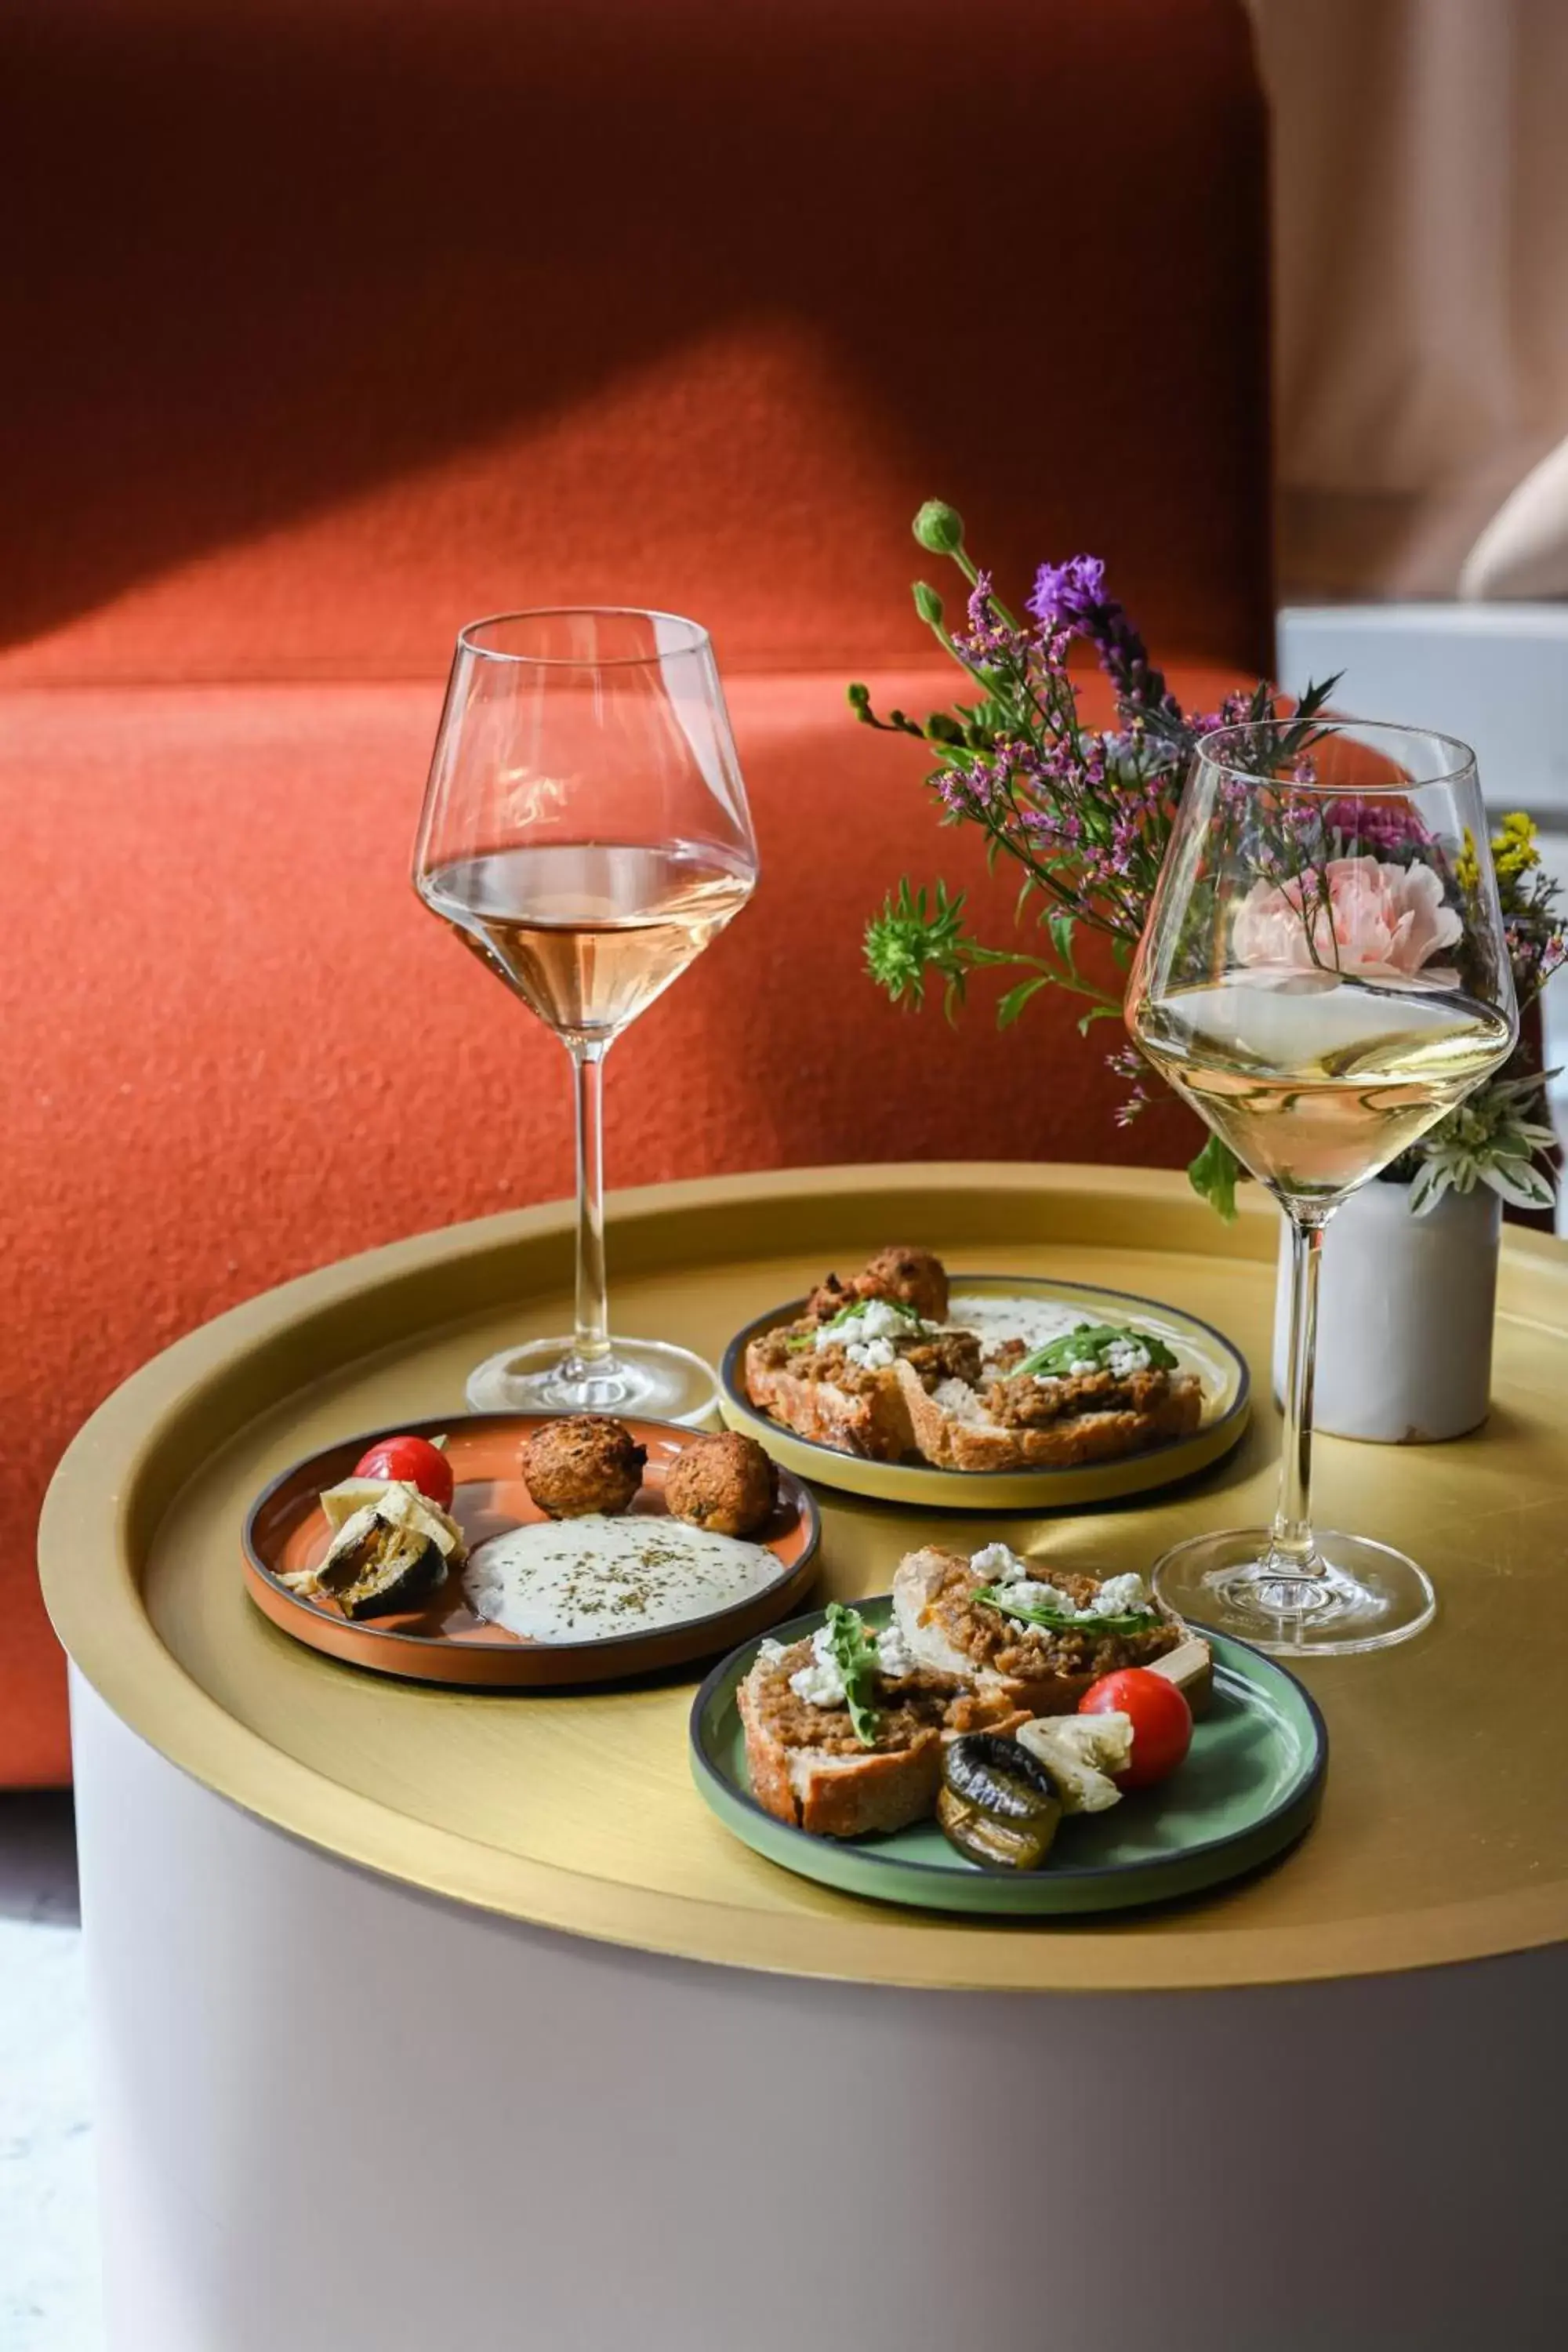 Food and drinks, Lunch and Dinner in Okko Hotels Grenoble Jardin Hoche